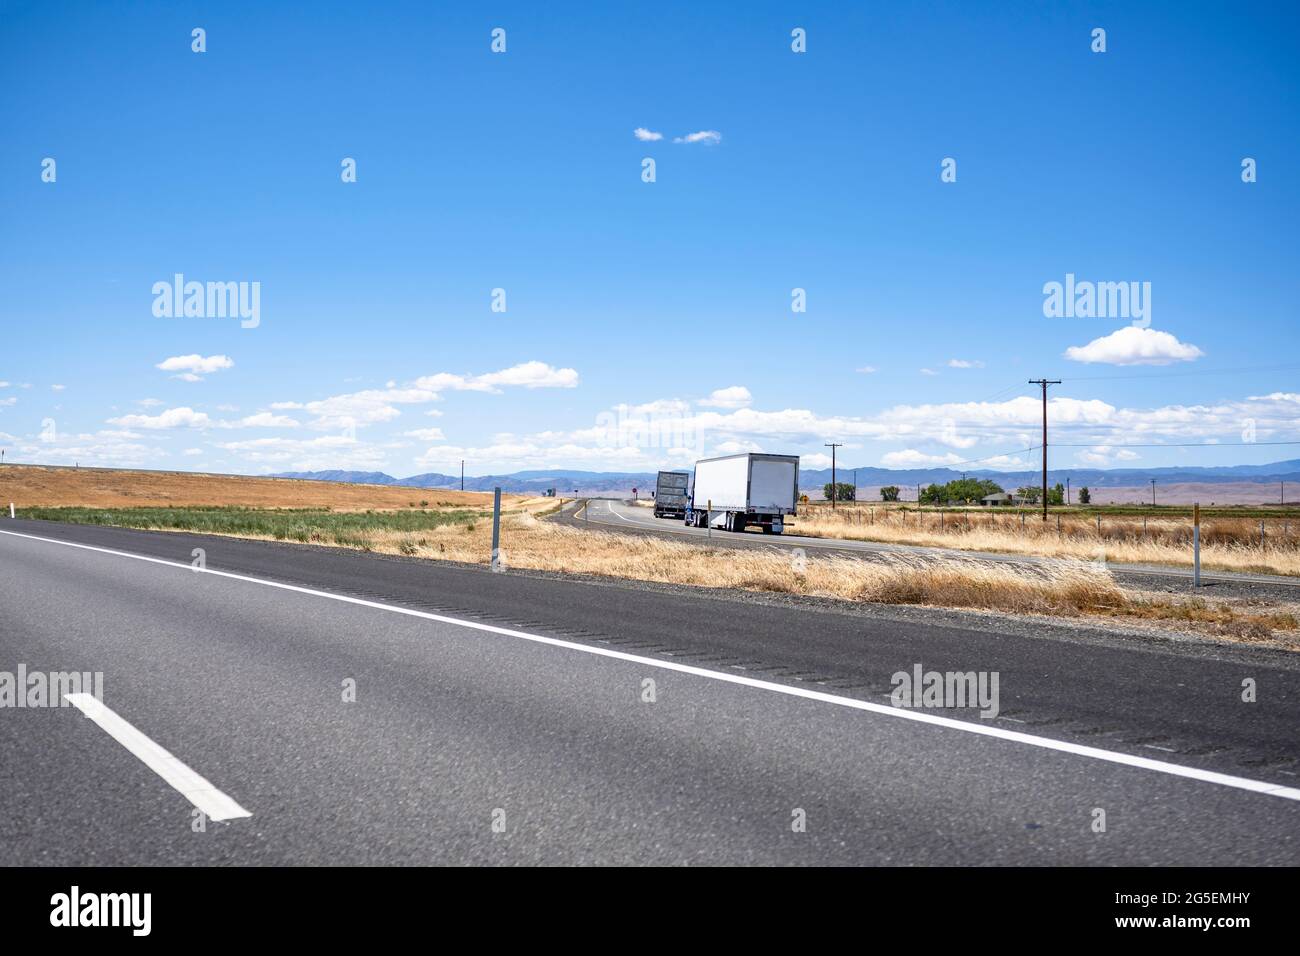 Group of big rigs semi trucks tractors caring cargo in different semi trailers standing on the shoulder of the highway exit intersection road take a b Stock Photo